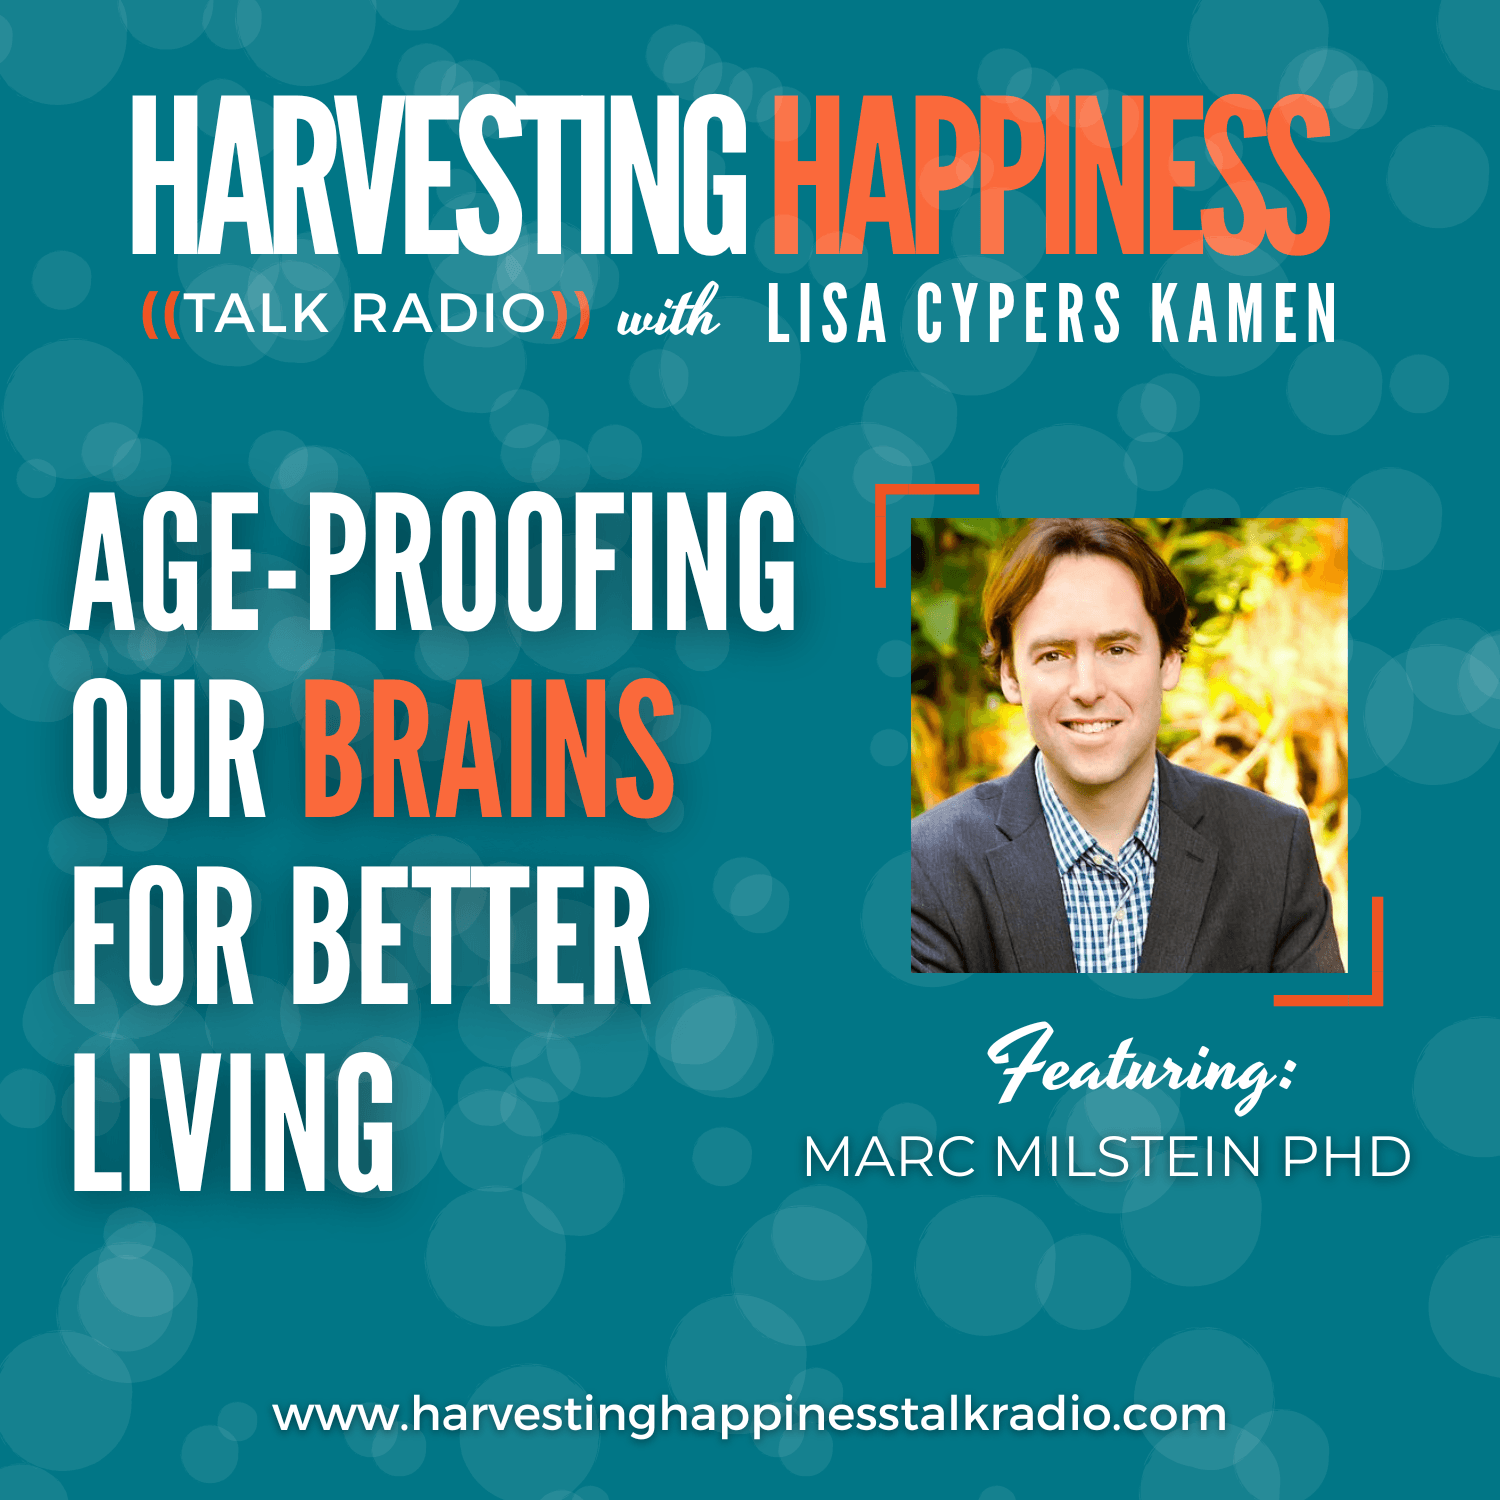 Podcast episode about aging and better living with Marc Milstein, PhD and positive psychology expert Lisa Cypers Kamen